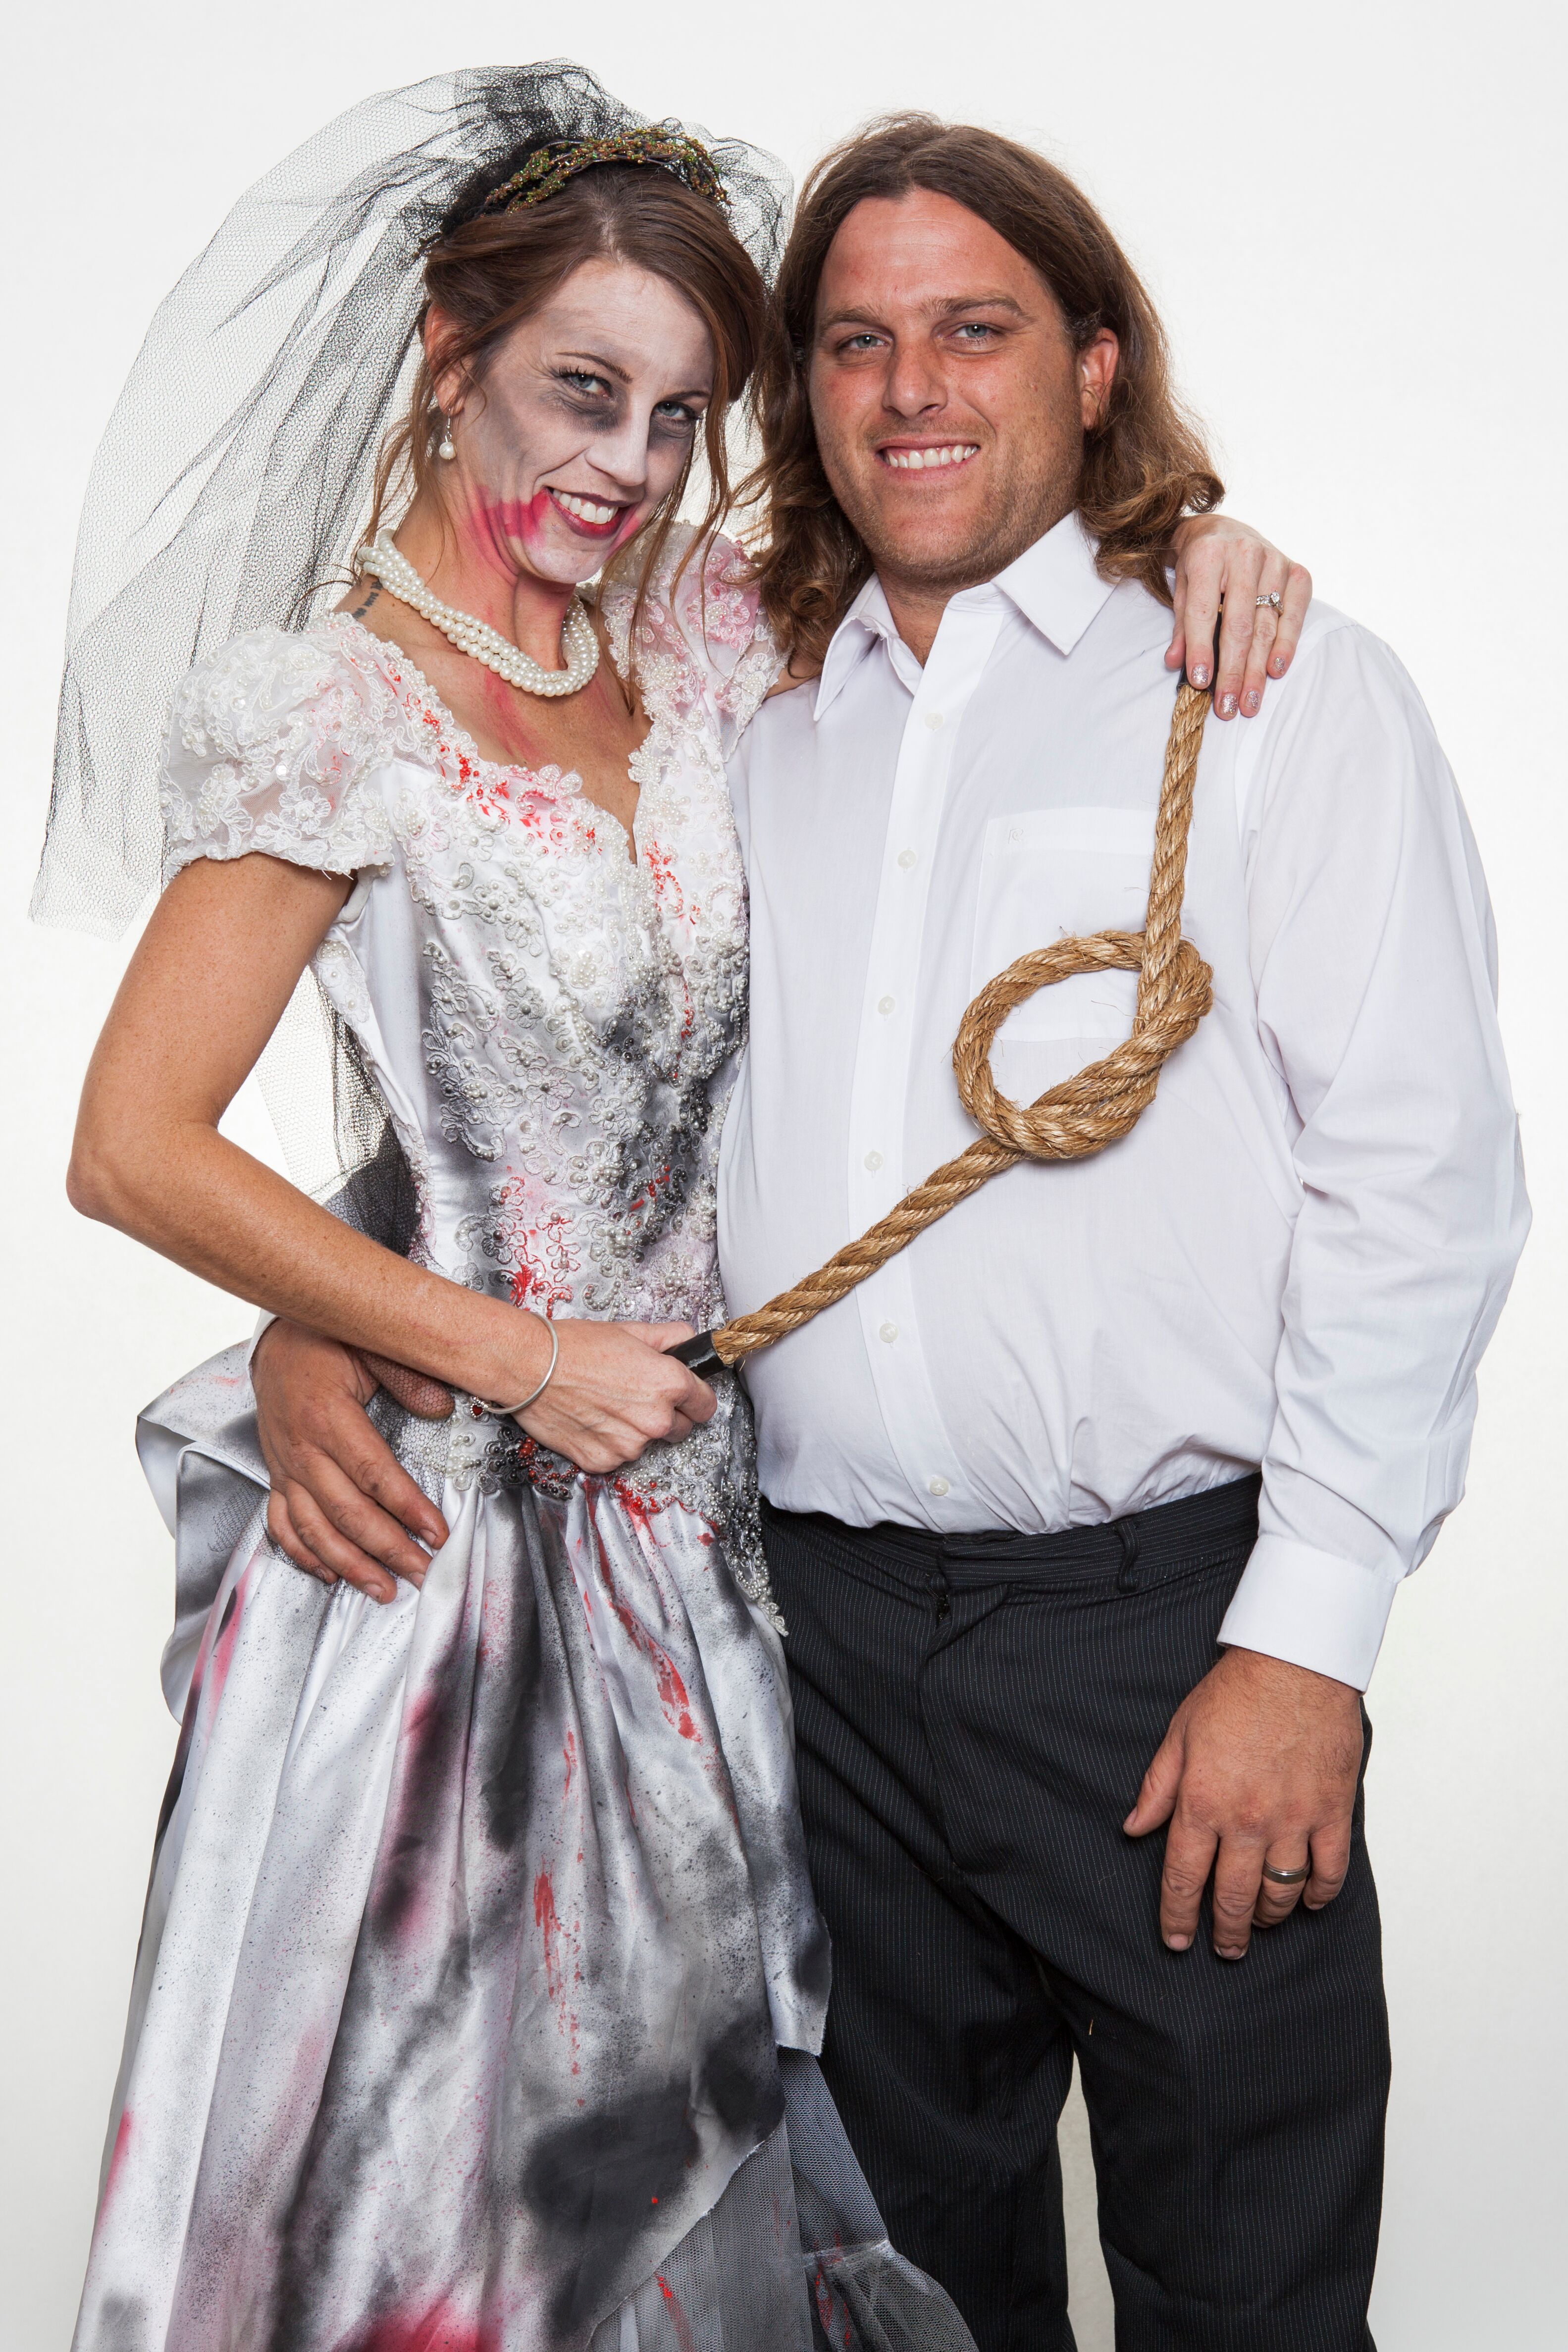 A Halloween Themed Wedding at a Private Residence in Lithia, Florida